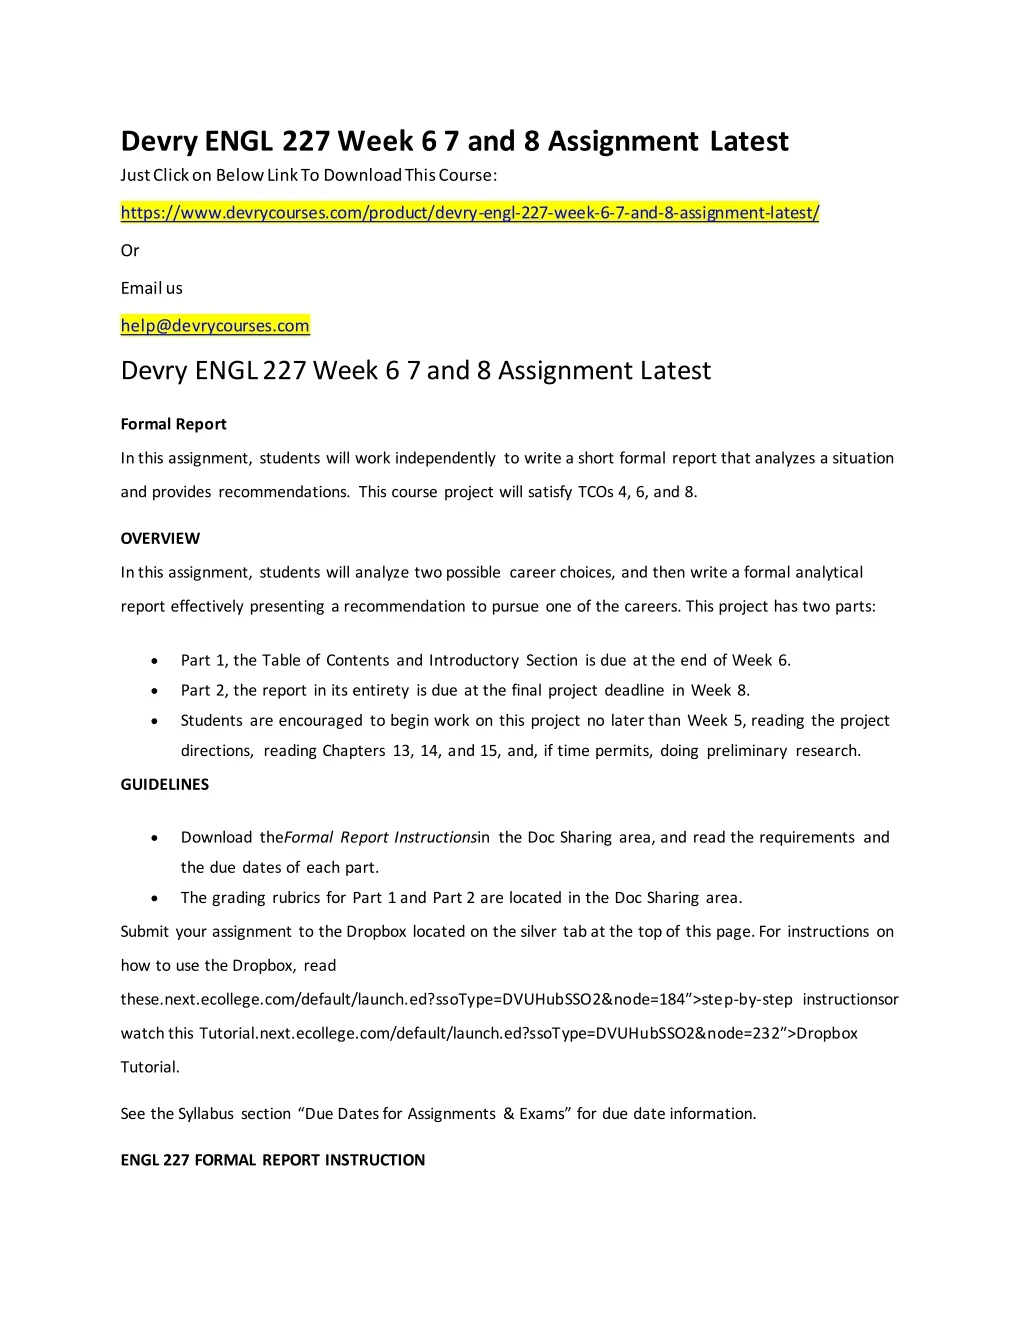 devry engl 227 week 6 7 and 8 assignment latest